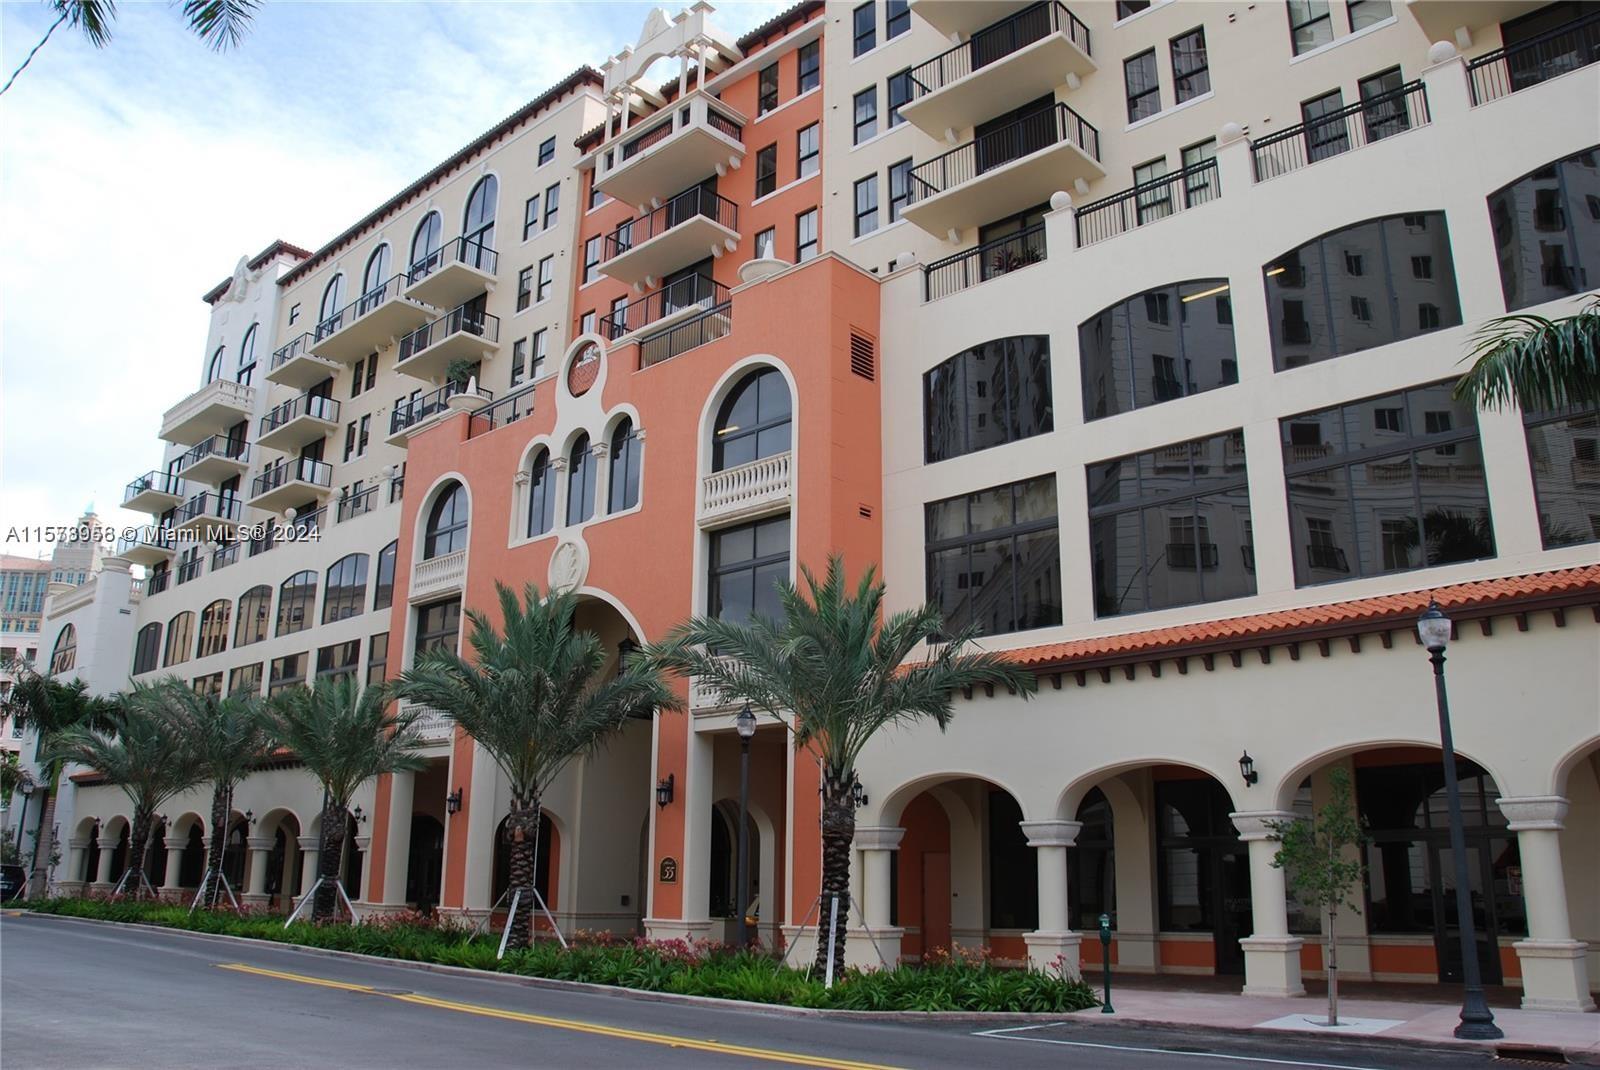 If you love Coral Gables this is your home. Take a look at this beautiful and large 1 bedroom apt . Beautiful kitchen with stunning wood and granite countertops. Enjoy the picturesque view of the inner courtyard & pool from your balcony. The 55 Merrick Luxury Condo is situated in the heart of Coral Gables, right in Miracle Mile to be more precise. Enjoy shopping and fine dining without having to drive at all. Incredible building full of amenities: 24 hours security & concierge, spa, pool, gym, media room, and more. Minutes from UM, Coconut Grove, Brickell, Downtown Miami, US1, I-95.